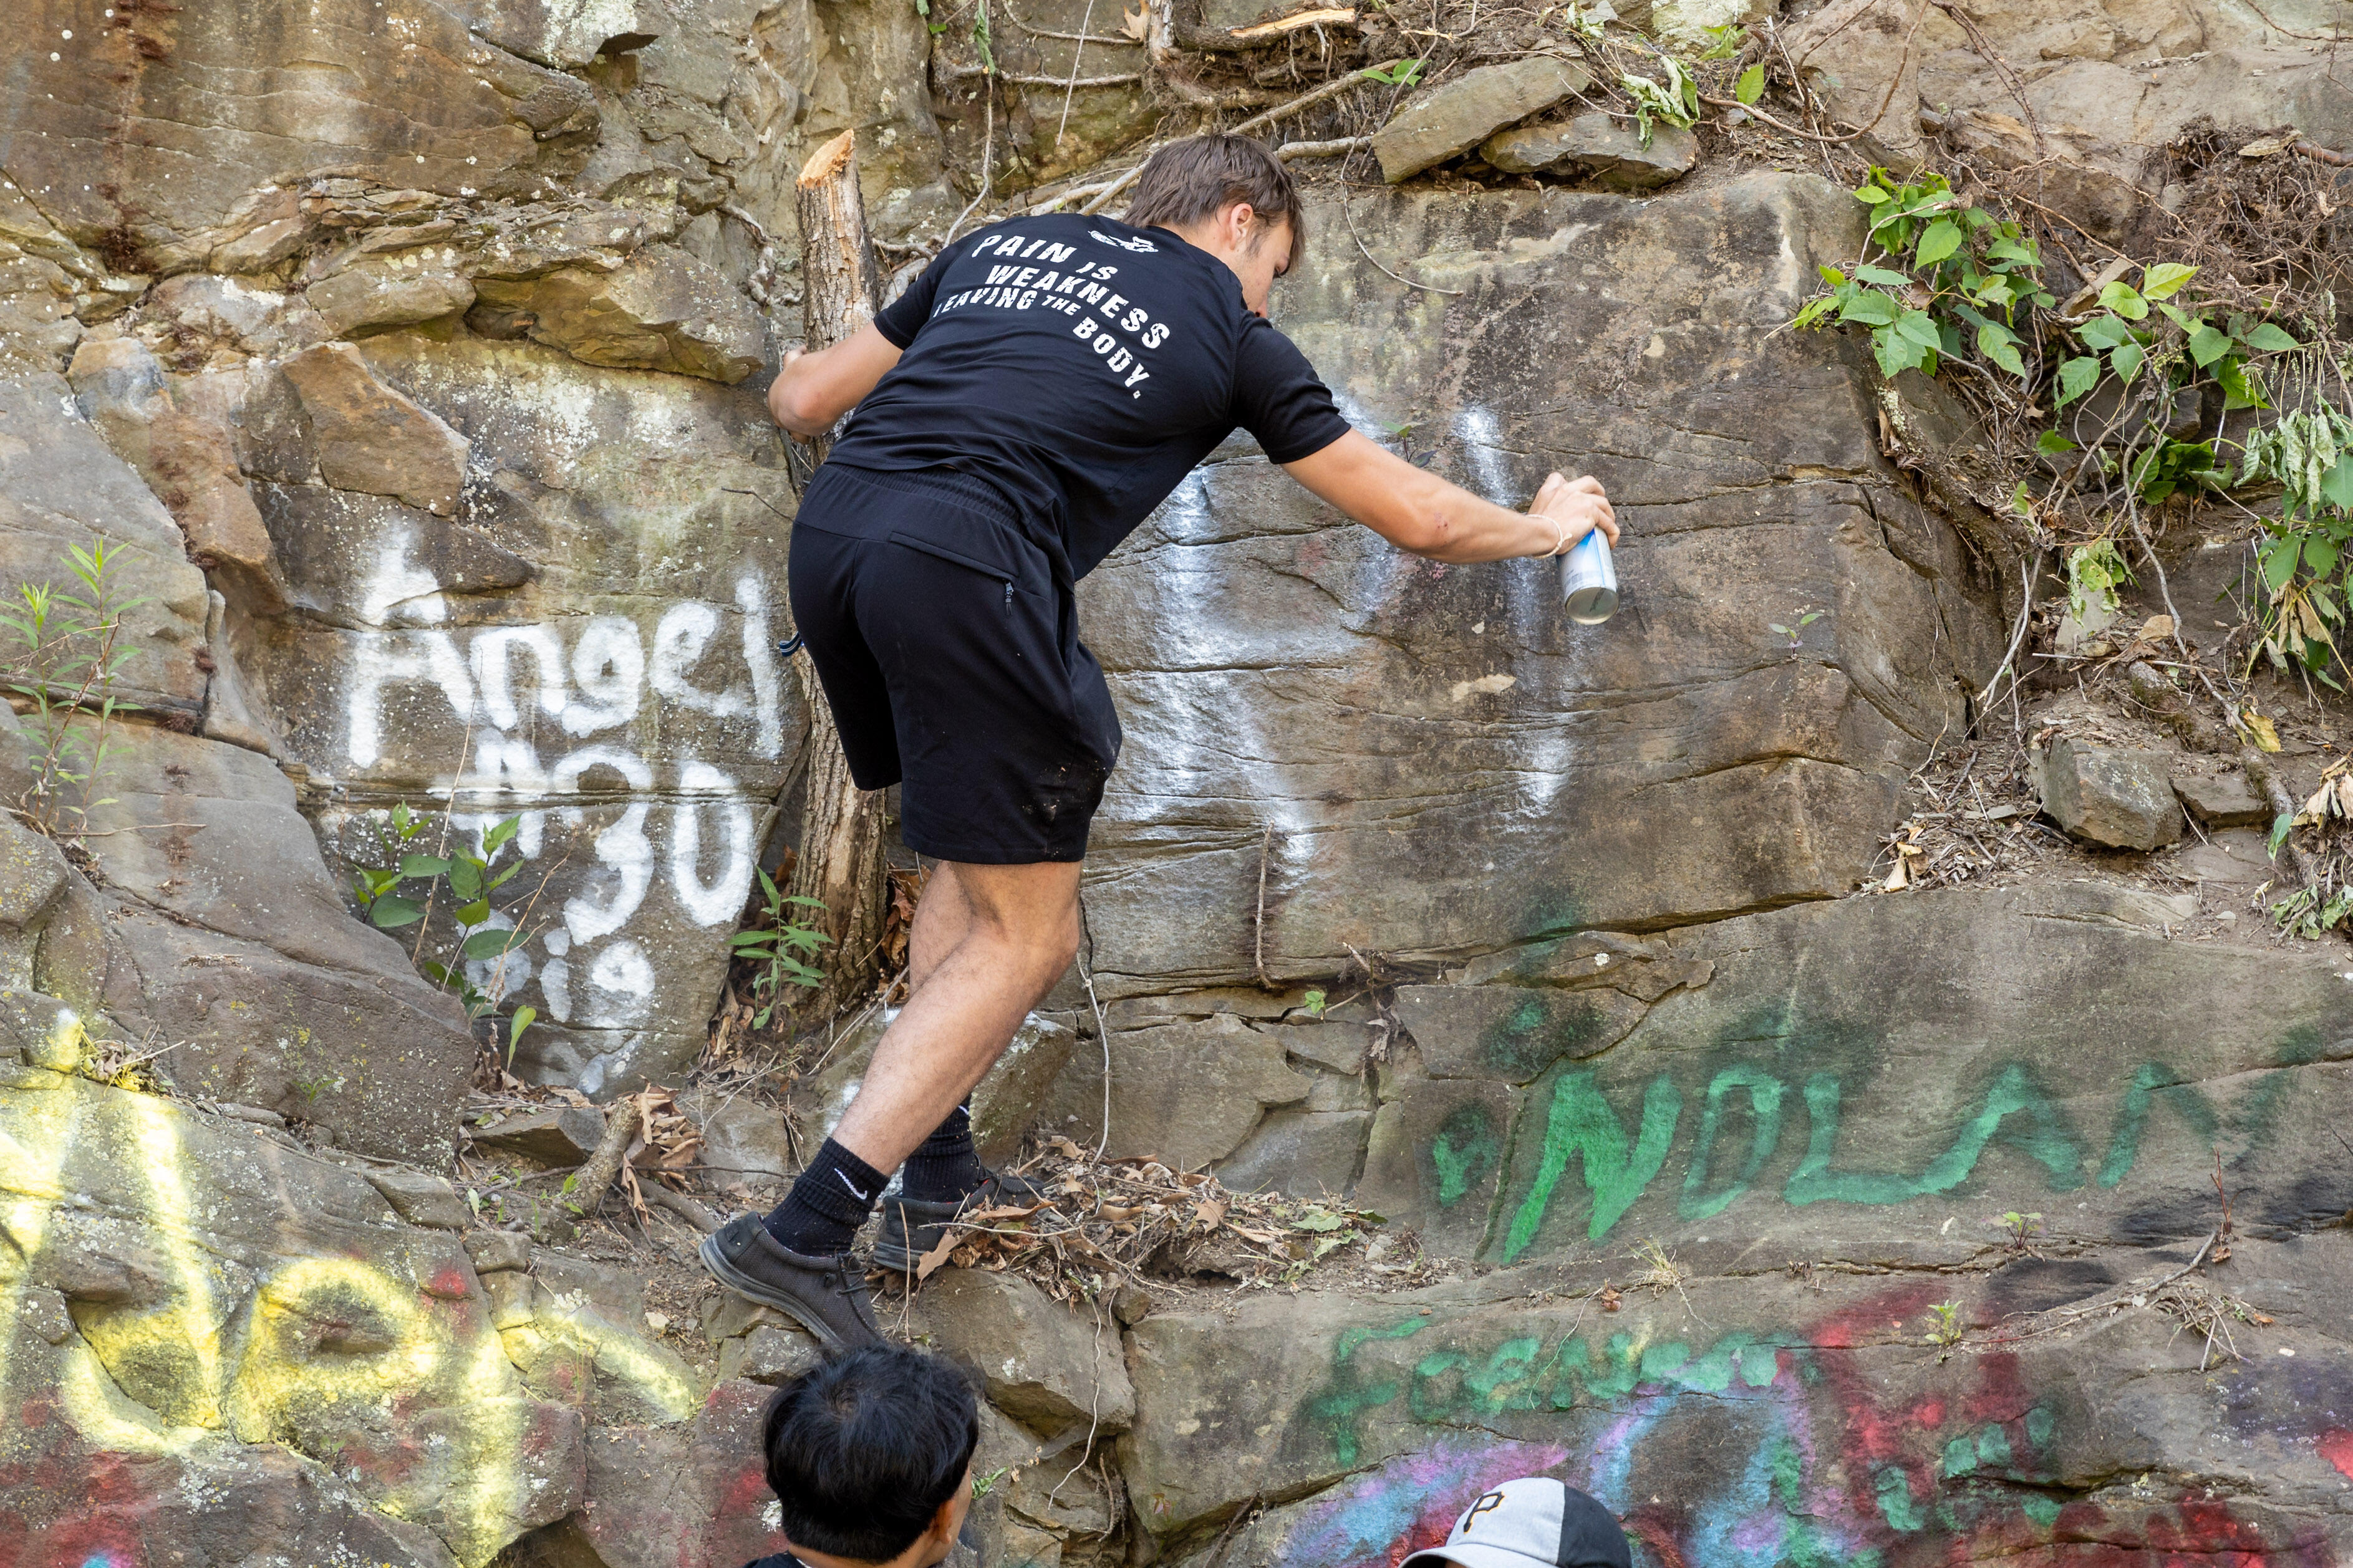 A student climbs a rock wall to paint his initials